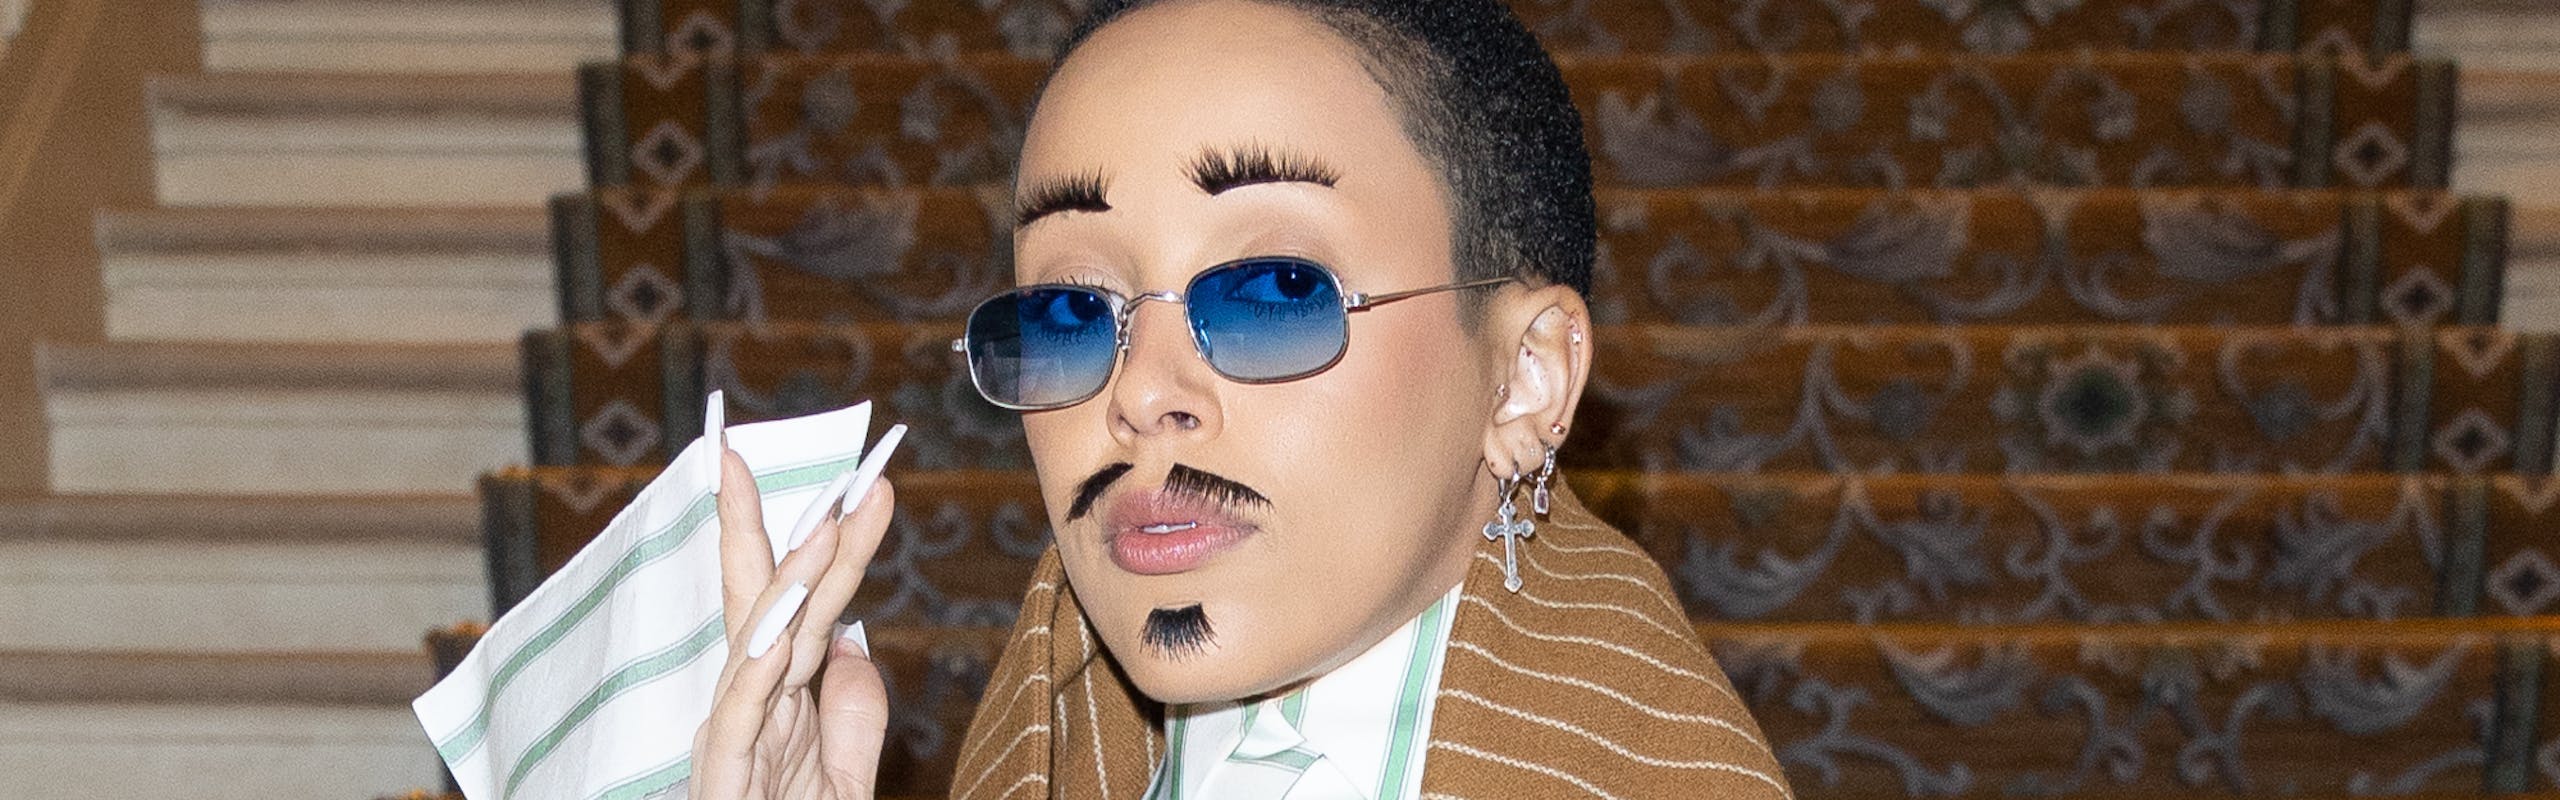 Doja Cat wears brown and white striped suit.